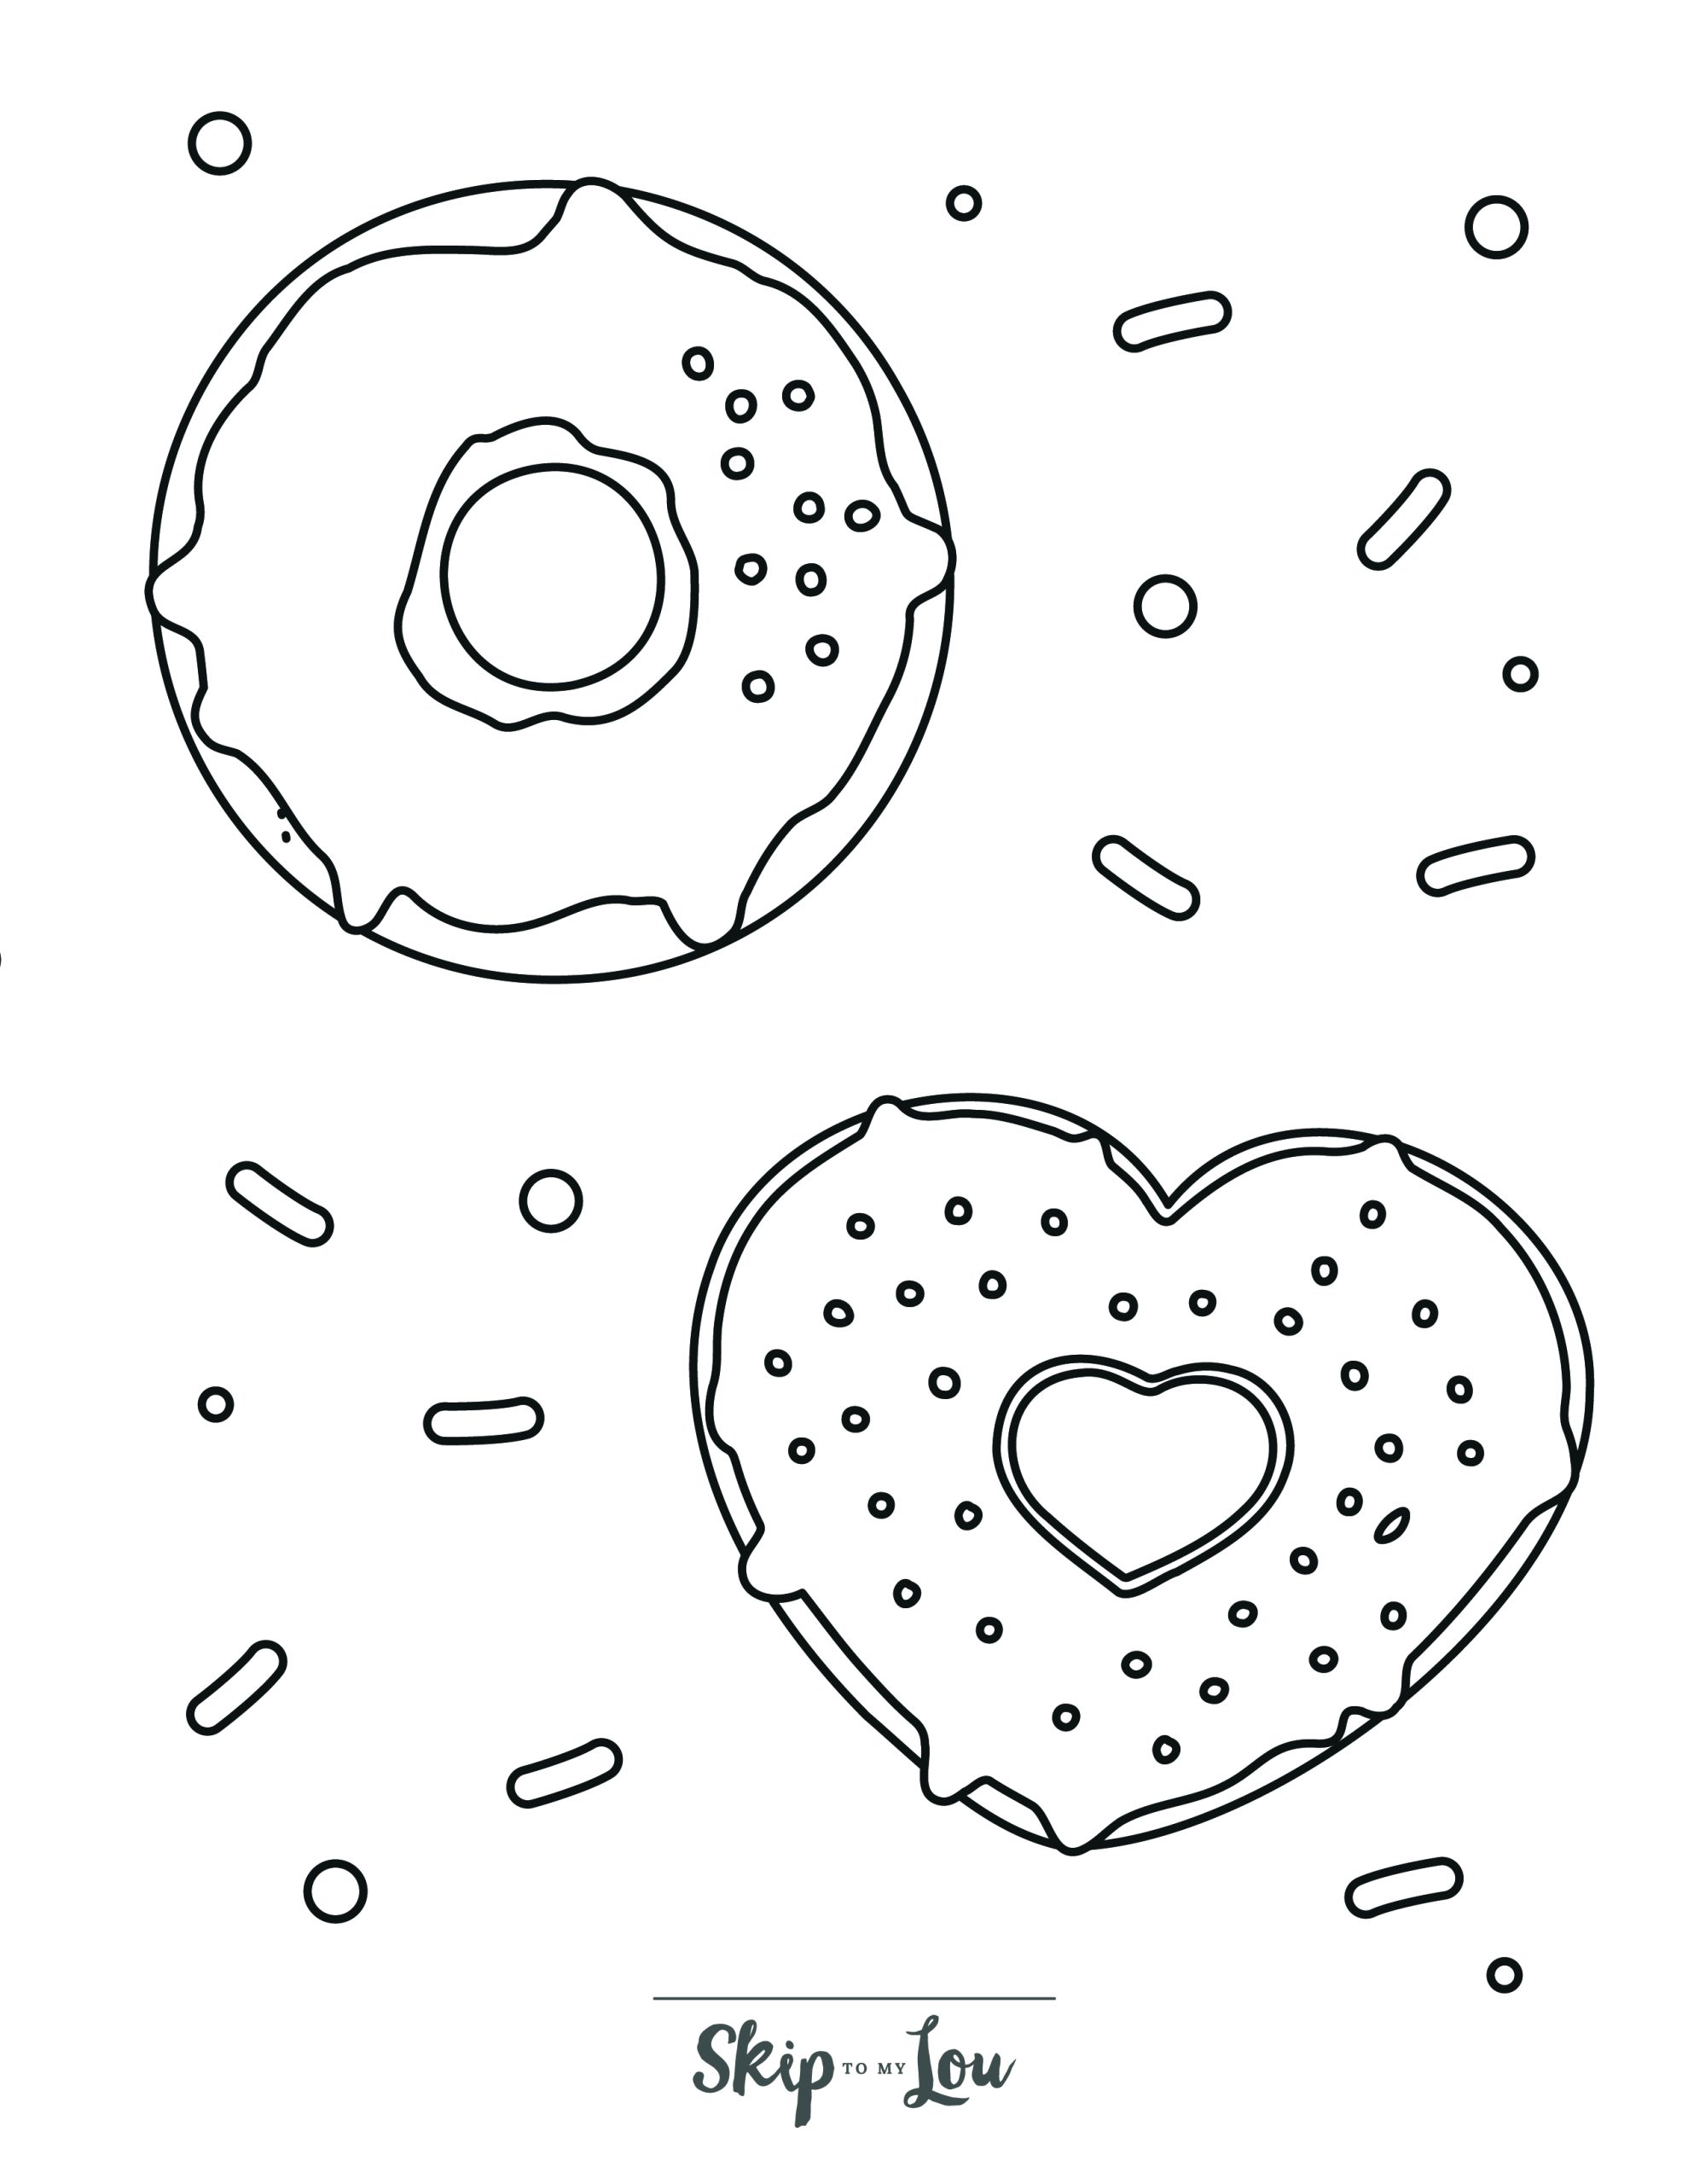 Fun donut coloring pages with free printable book skip to my lou